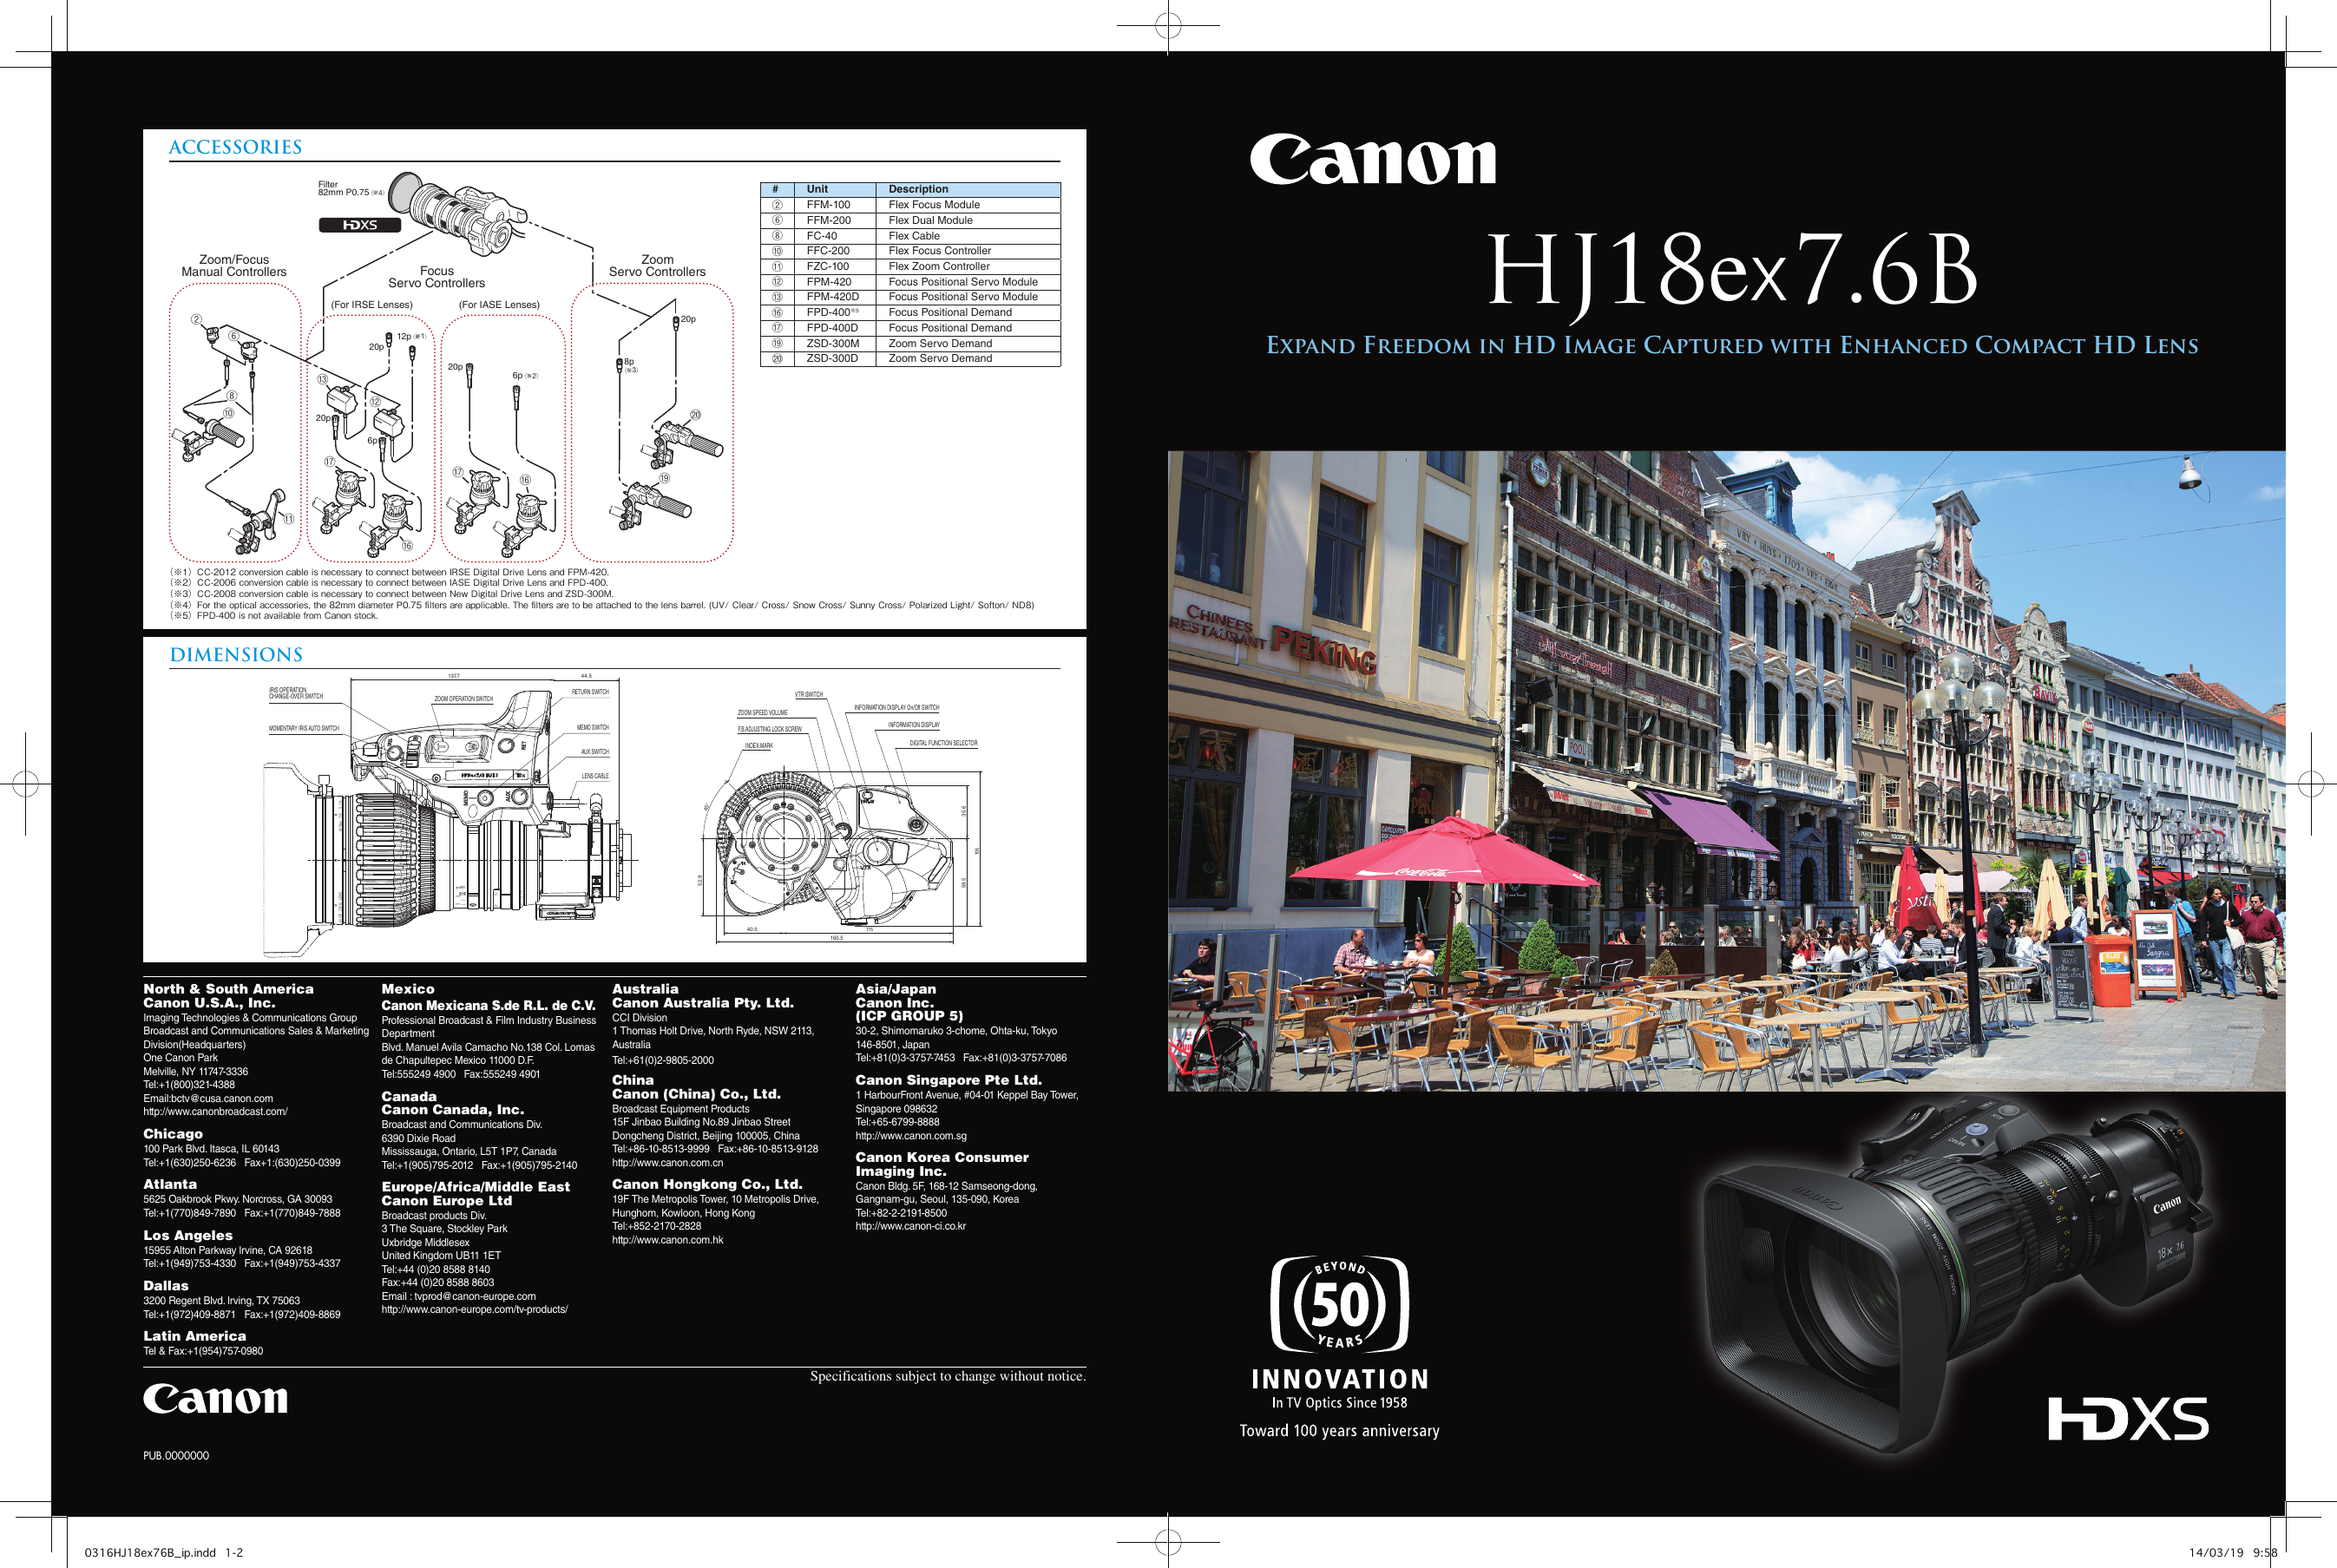 Page 1 of 2 - Canon Canon-Hj18Ex7-6B-Series-Product-Brochure- HJ18ex76B_X1a  Canon-hj18ex7-6b-series-product-brochure